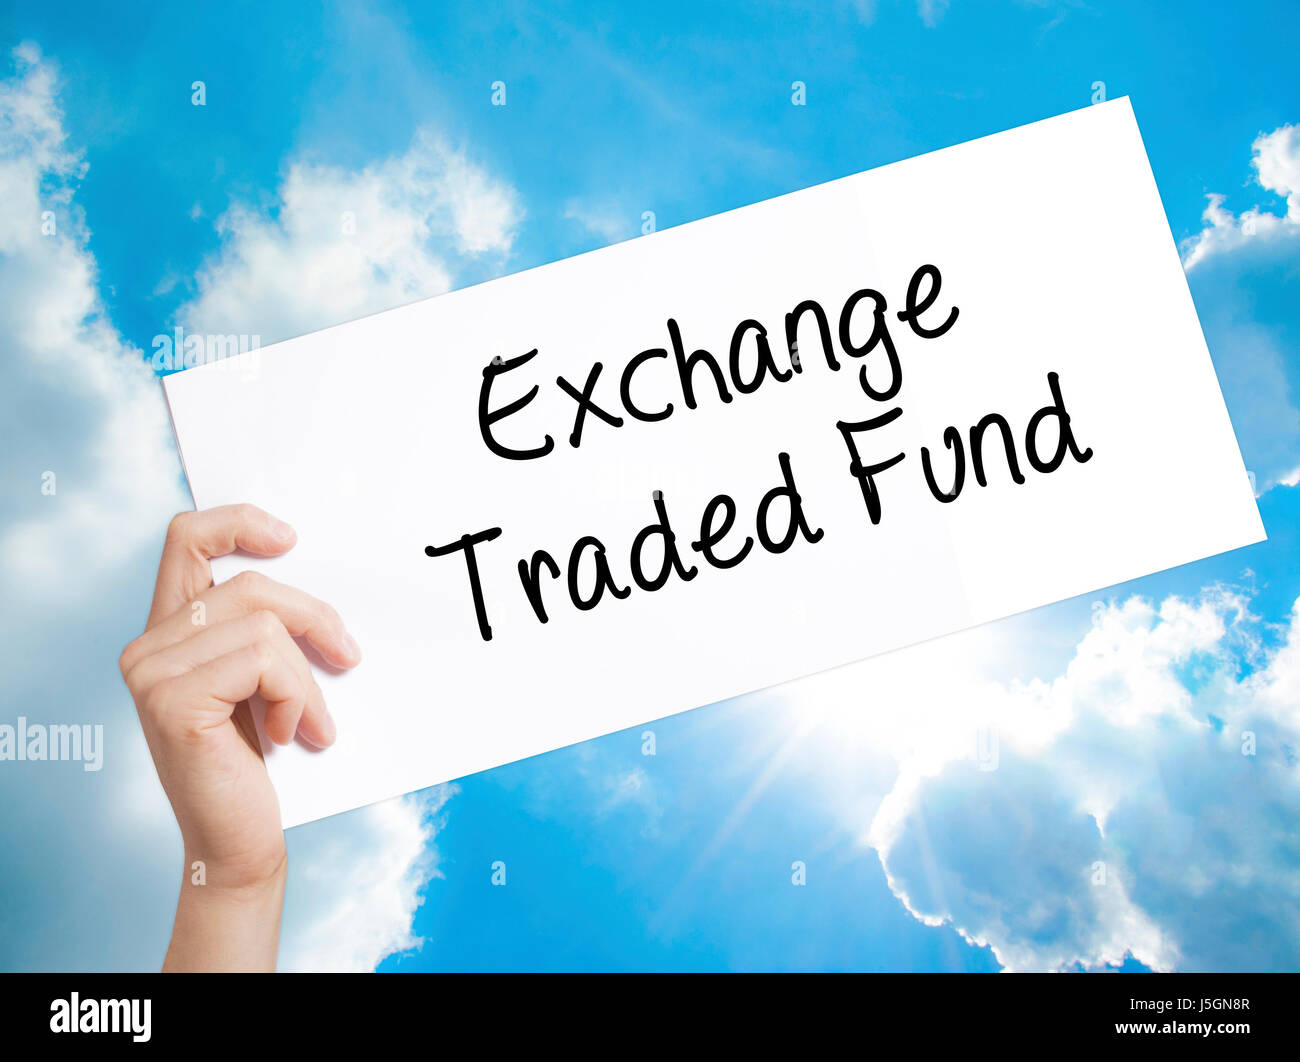 Exchange Traded Fund Sign on white paper. Man Hand Holding Paper with text. Isolated on sky background.  Business concept. Stock Photo Stock Photo